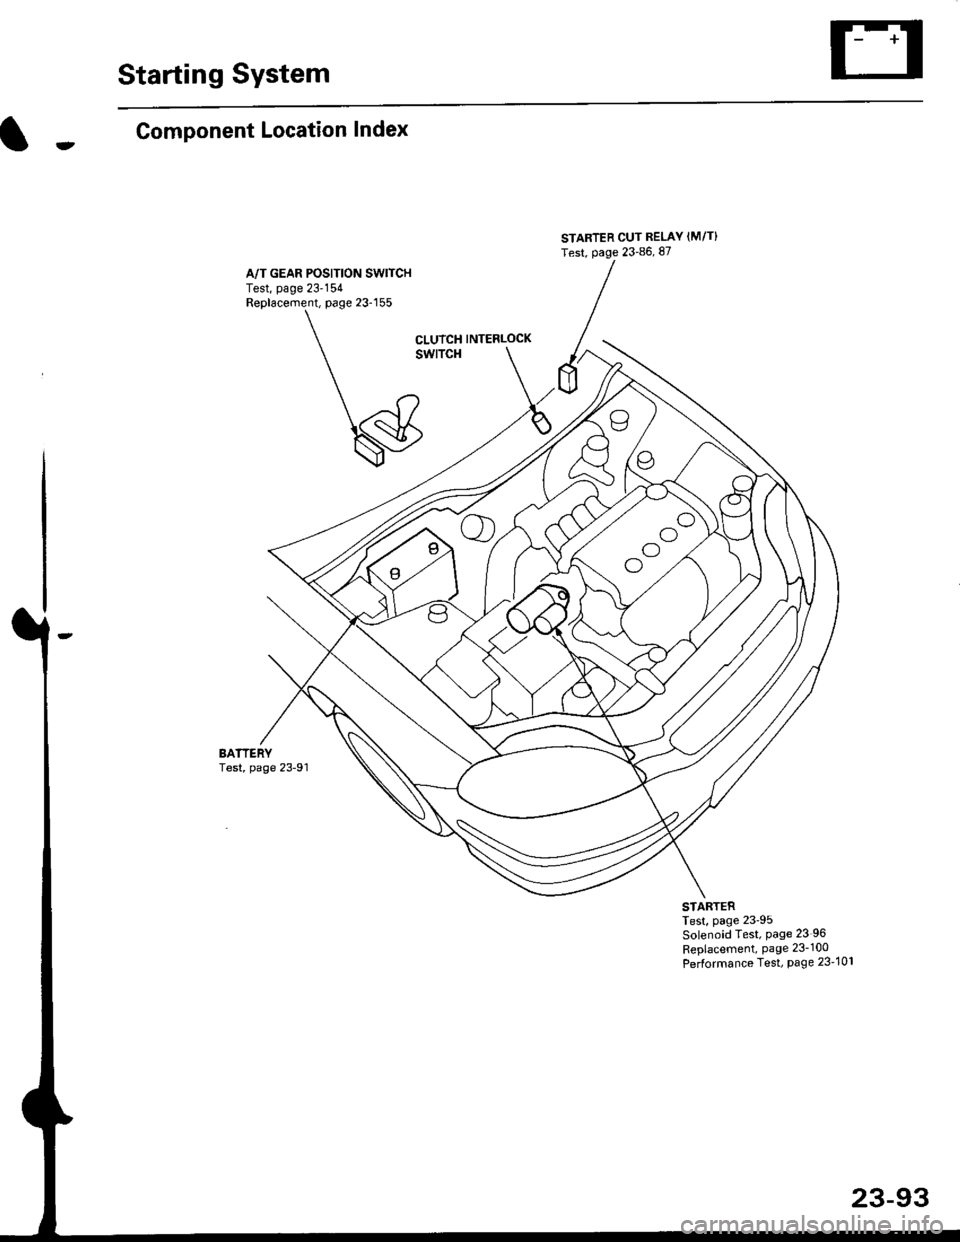 HONDA CIVIC 1996 6.G Owners Manual Starting System
Component Location Index
A/T GEAR POSITION SW|TCHTest, page 23154Replacement, page 23-155
STARTER CUT RELAY (M/T}
Test, page 23-86, 87
oo
ool
CLUTCH INTERLOCK
swlTcH
BATTERYTest, page